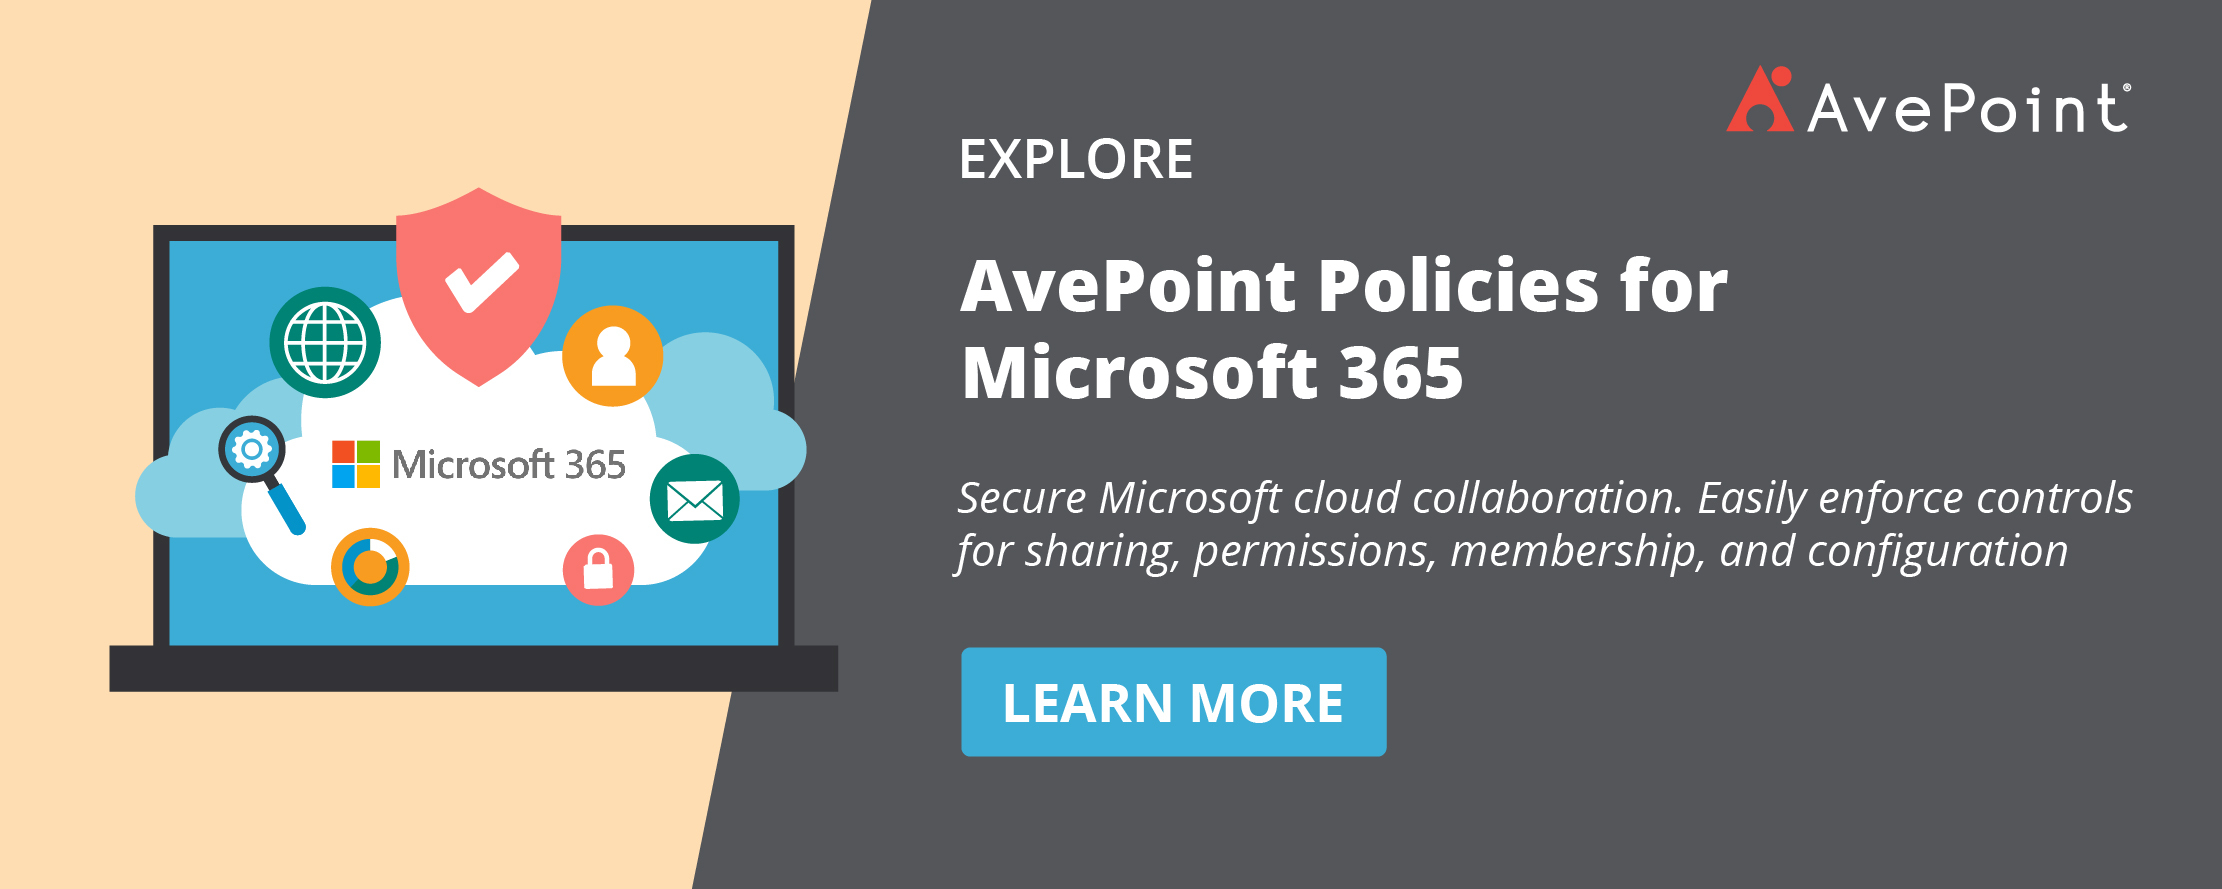 AvePoint Policies for Microsoft 365